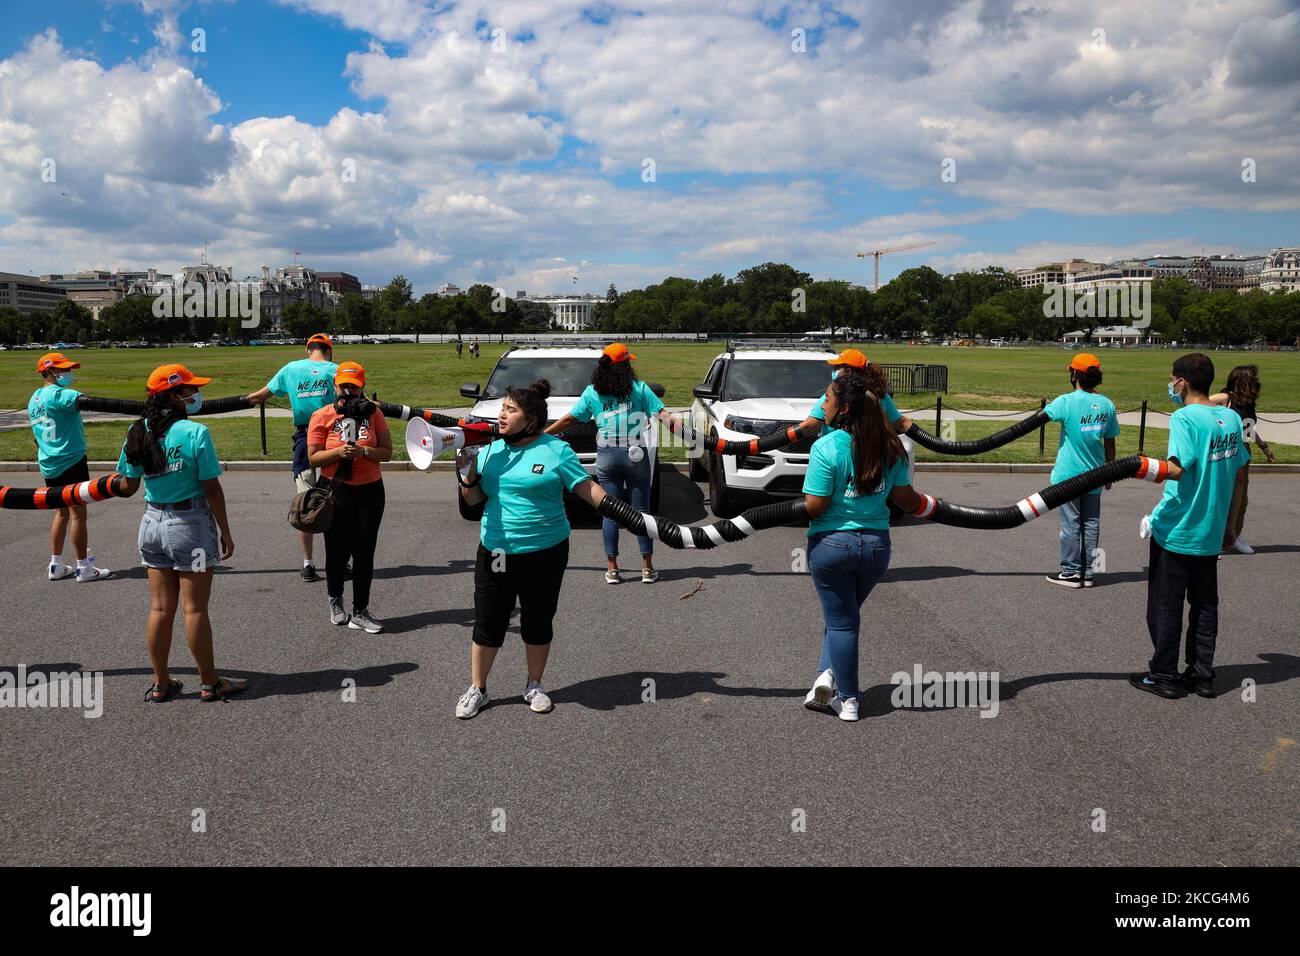 Demonstrators lock arms during a direct action at a Secret Service vehicle checkpoint entrance to the White House grounds on June 15, 2021. Activists associated with the United We Dream organization gathered on the 9th anniversary of the Obama administration signing the Deferred Action for Childhood Arrivals policy to demand continued immigration protections and reform (Photo by Bryan Olin Dozier/NurPhoto) Stock Photo